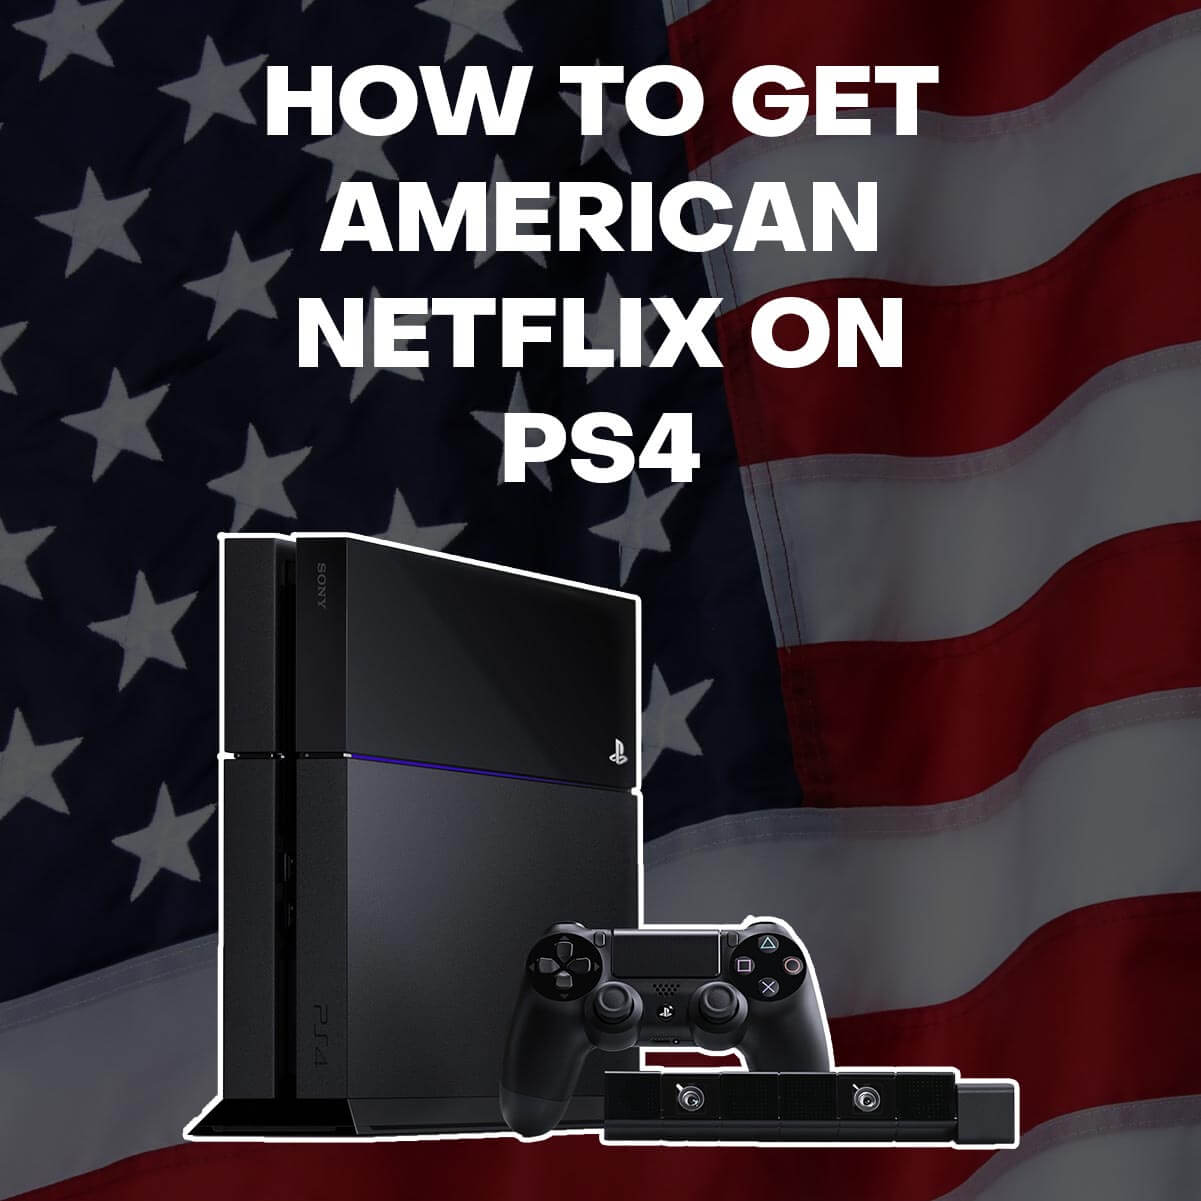 How to Get American Netflix on PS4 in Canada (July. 2021)